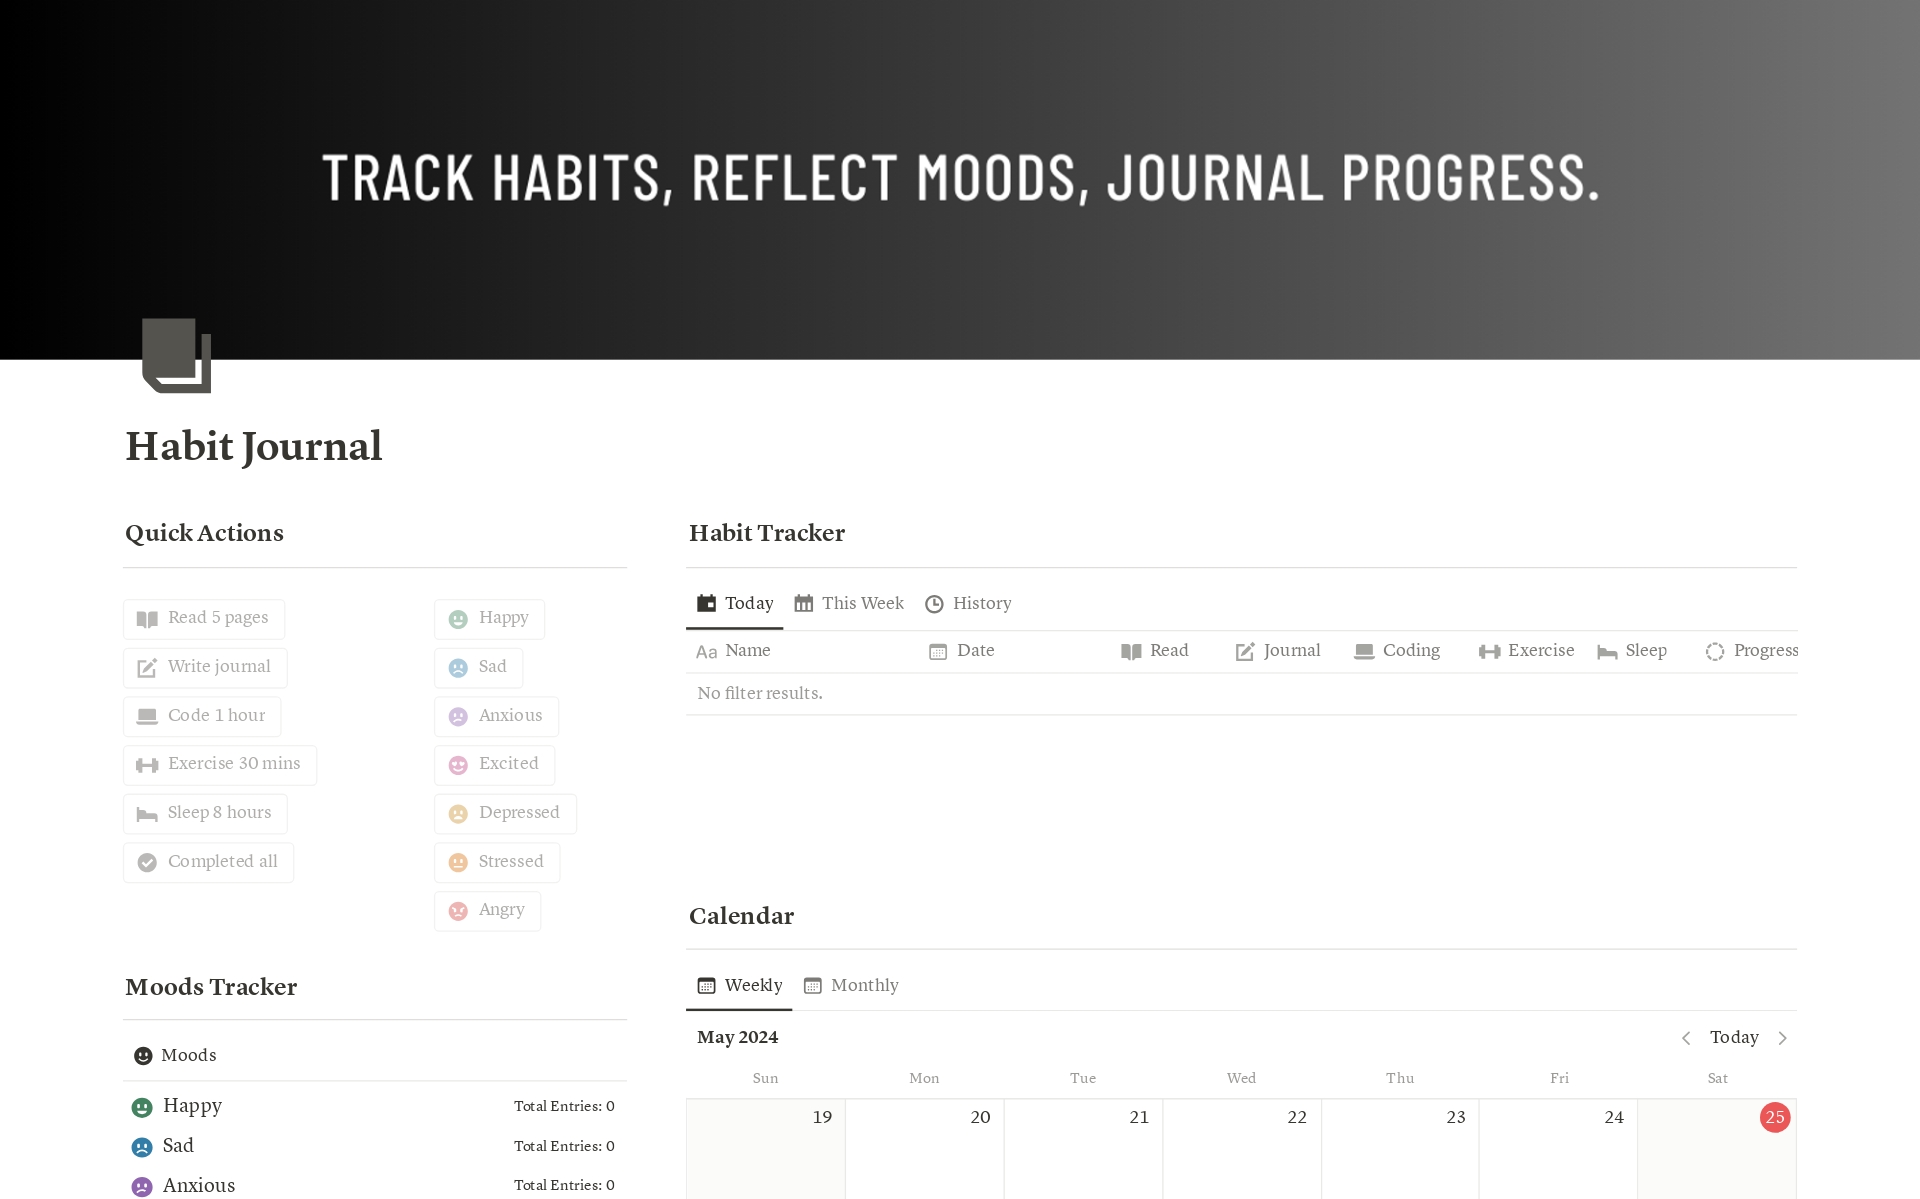 Discover the power of routine with our Notion Habit Journal template! Track habits and moods easily with iOS integration. Embrace daily journaling for self-growth and stay aligned with your goals. Start your transformative journey to well-being now.